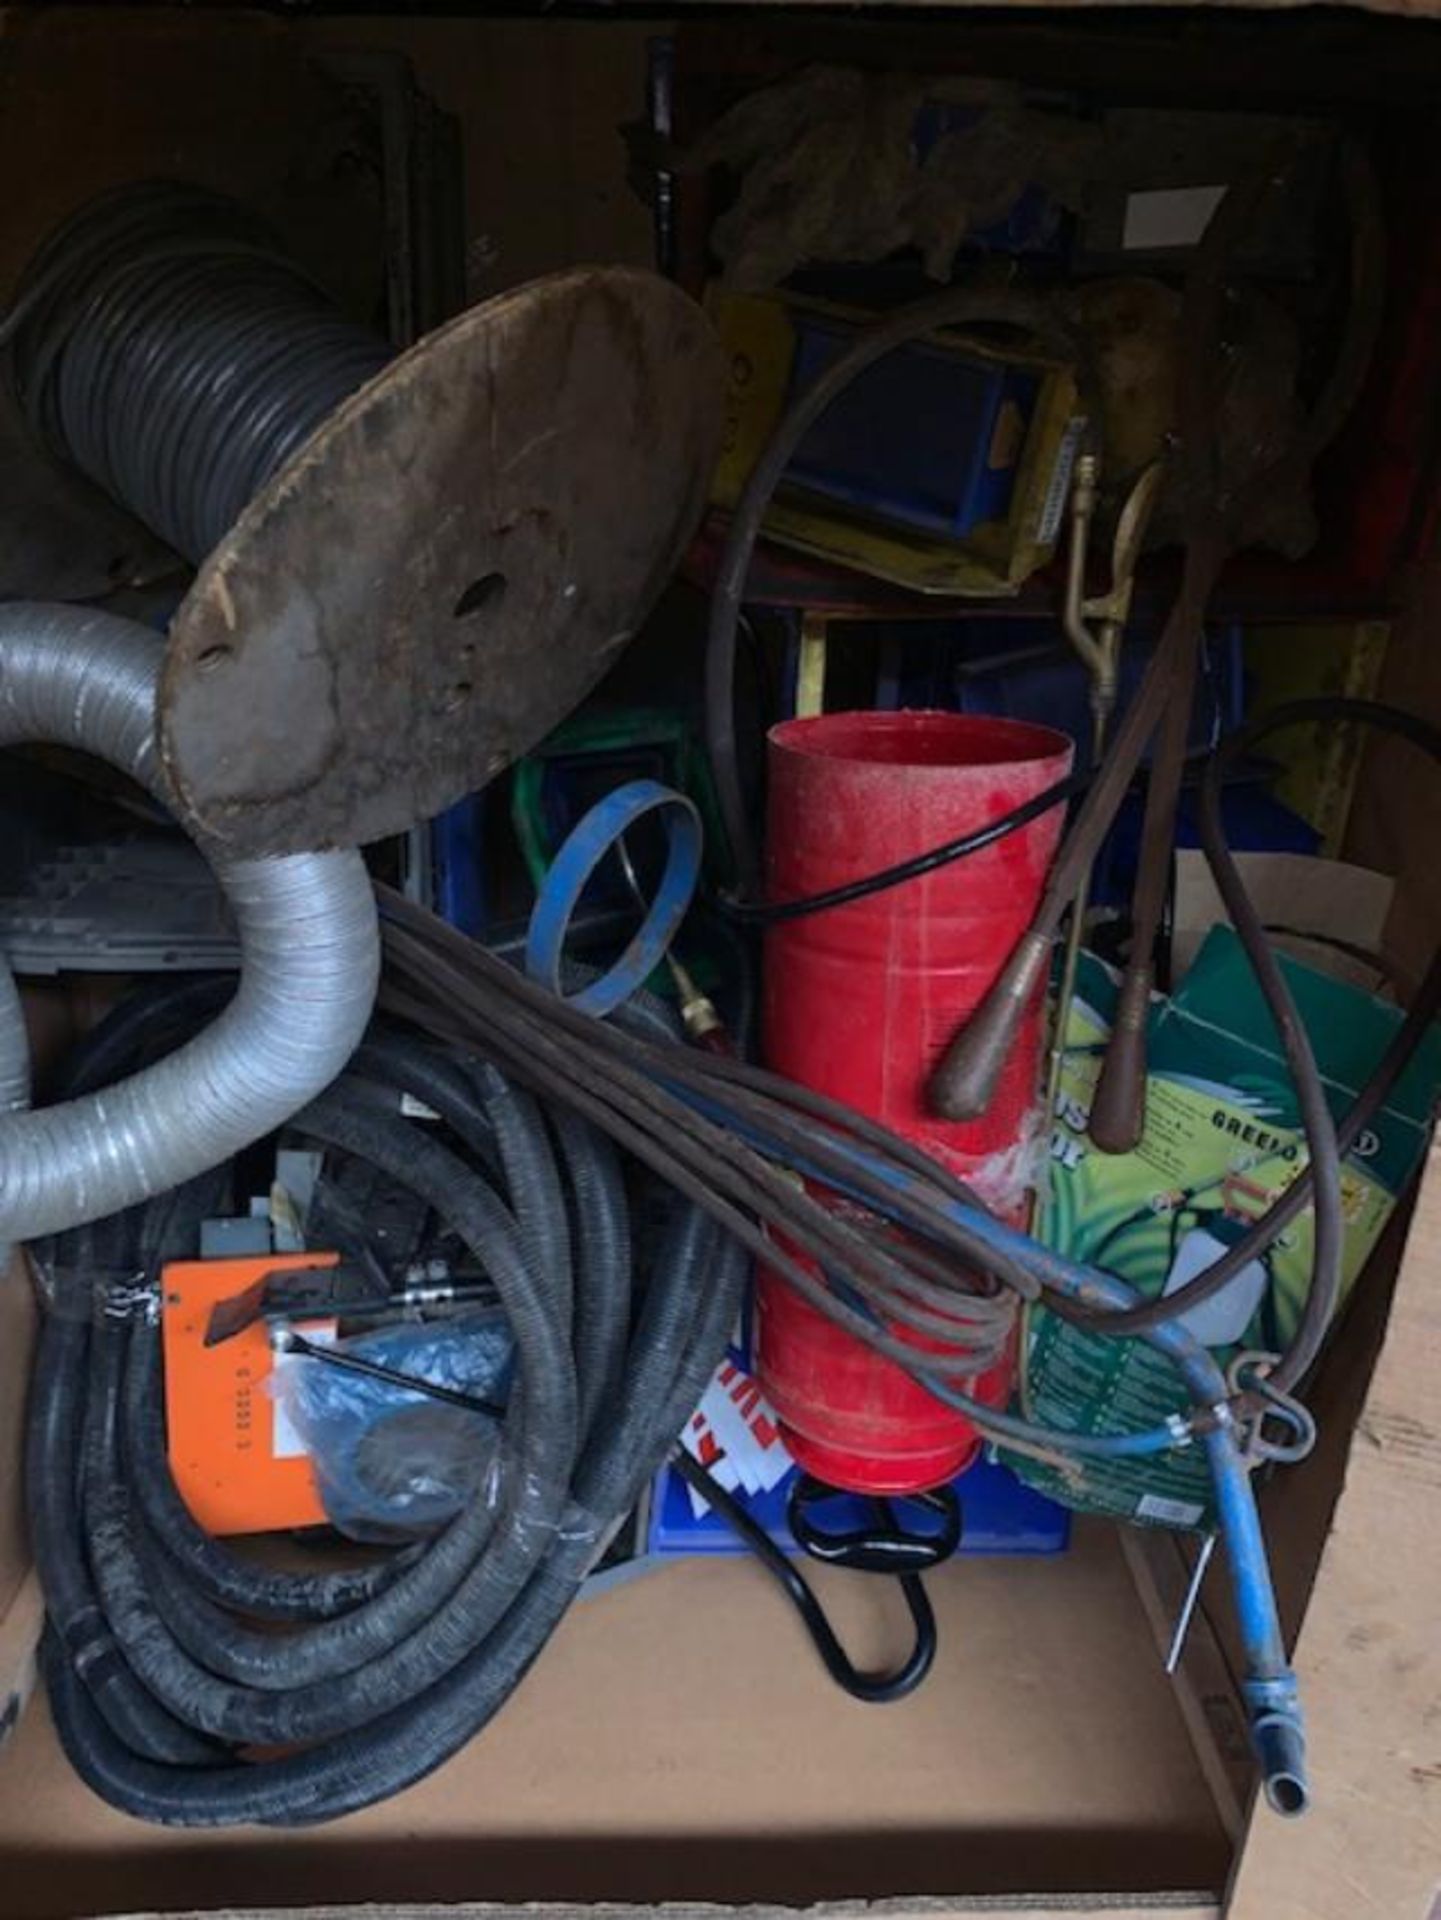 GAYLOR BOX OF CHEMICAL SPRAYER , PLUMMER B TANK TORCH AND CART, MISCELLANEOUS WIRE, MOTOROLA RADIO - Image 2 of 4